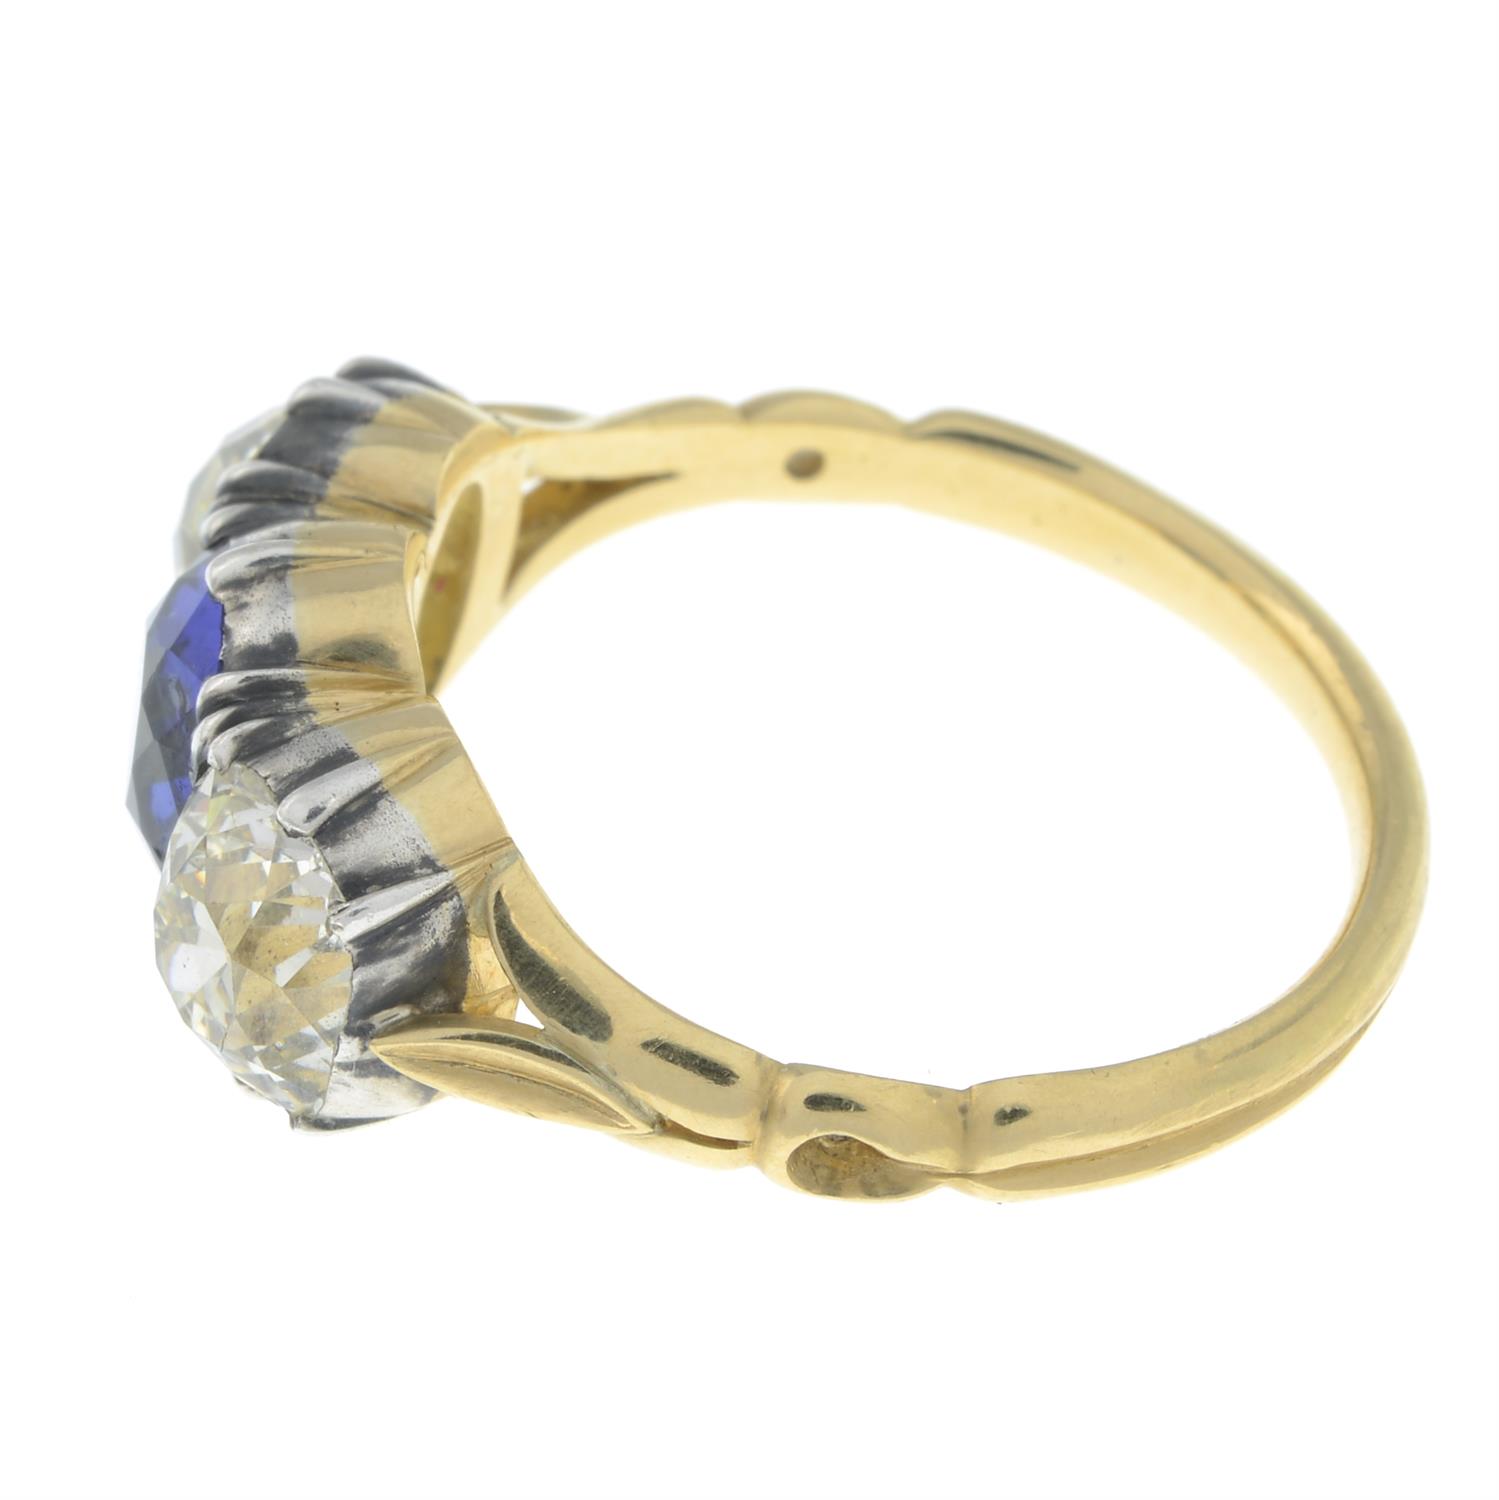 Late 19th century sapphire and old-cut diamond ring - Image 4 of 5